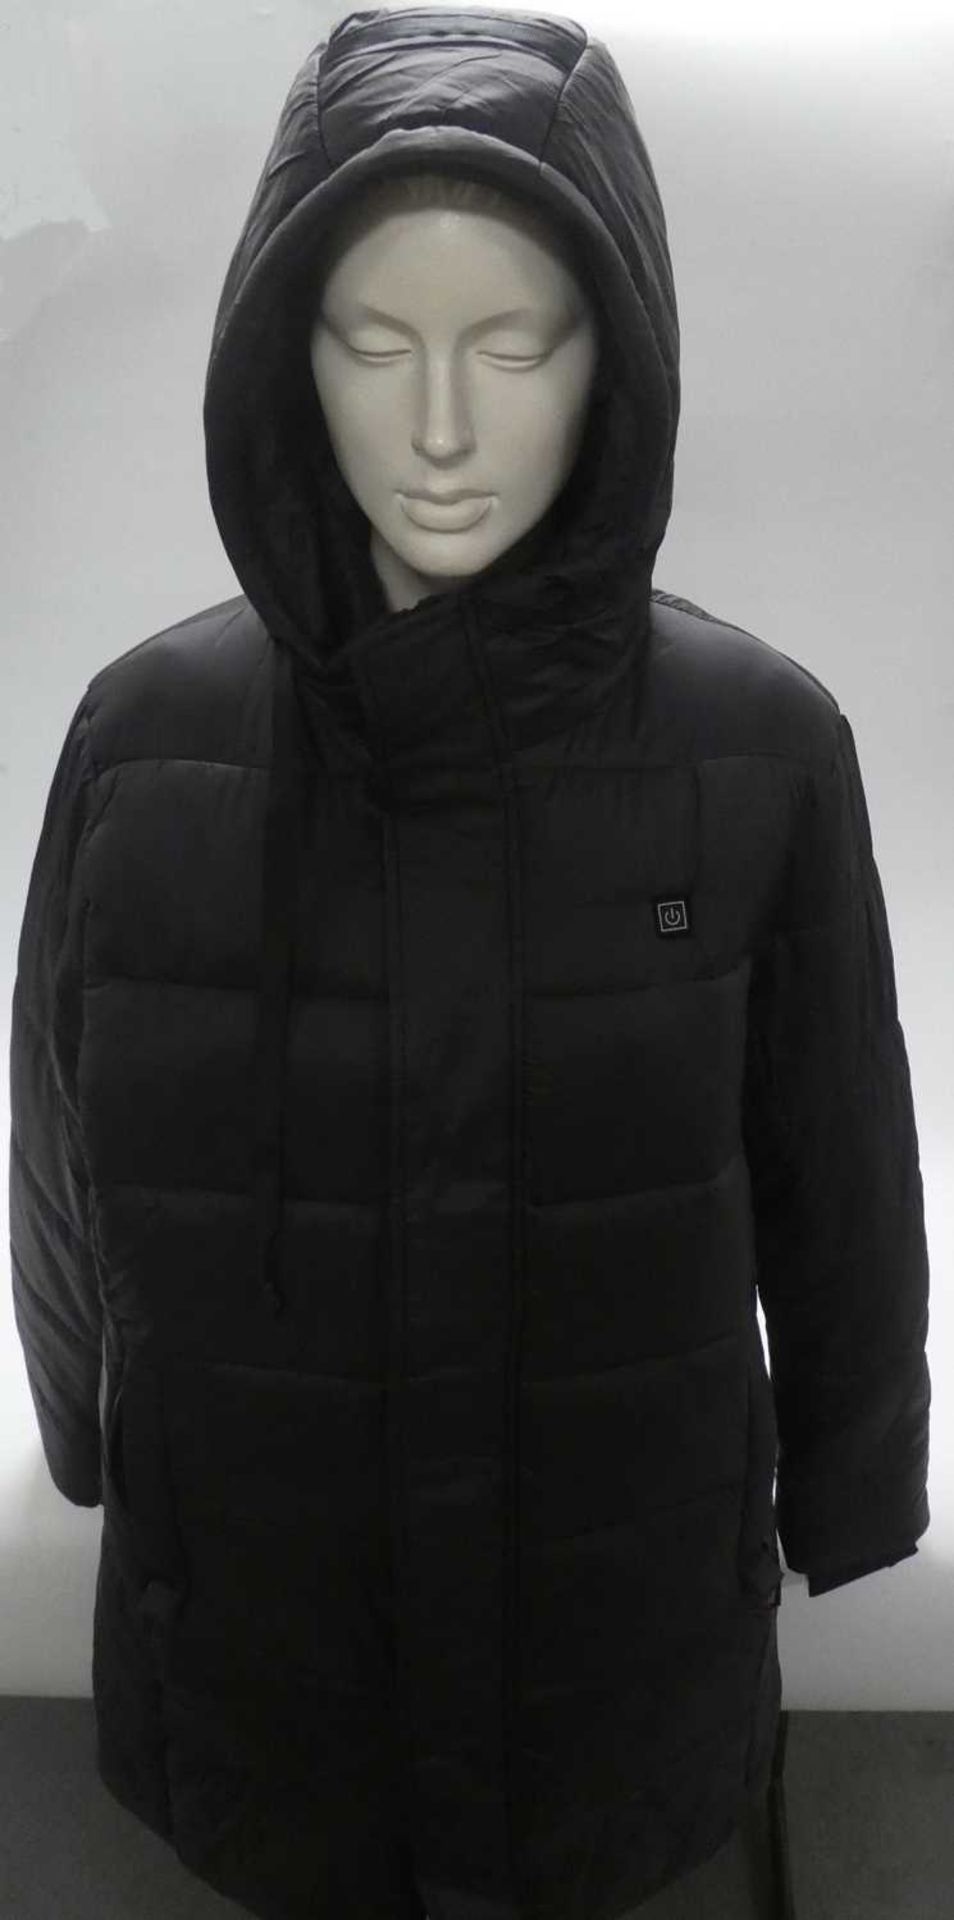 +VAT Thermofusion heated parka with 5000mAh battery pack size XL